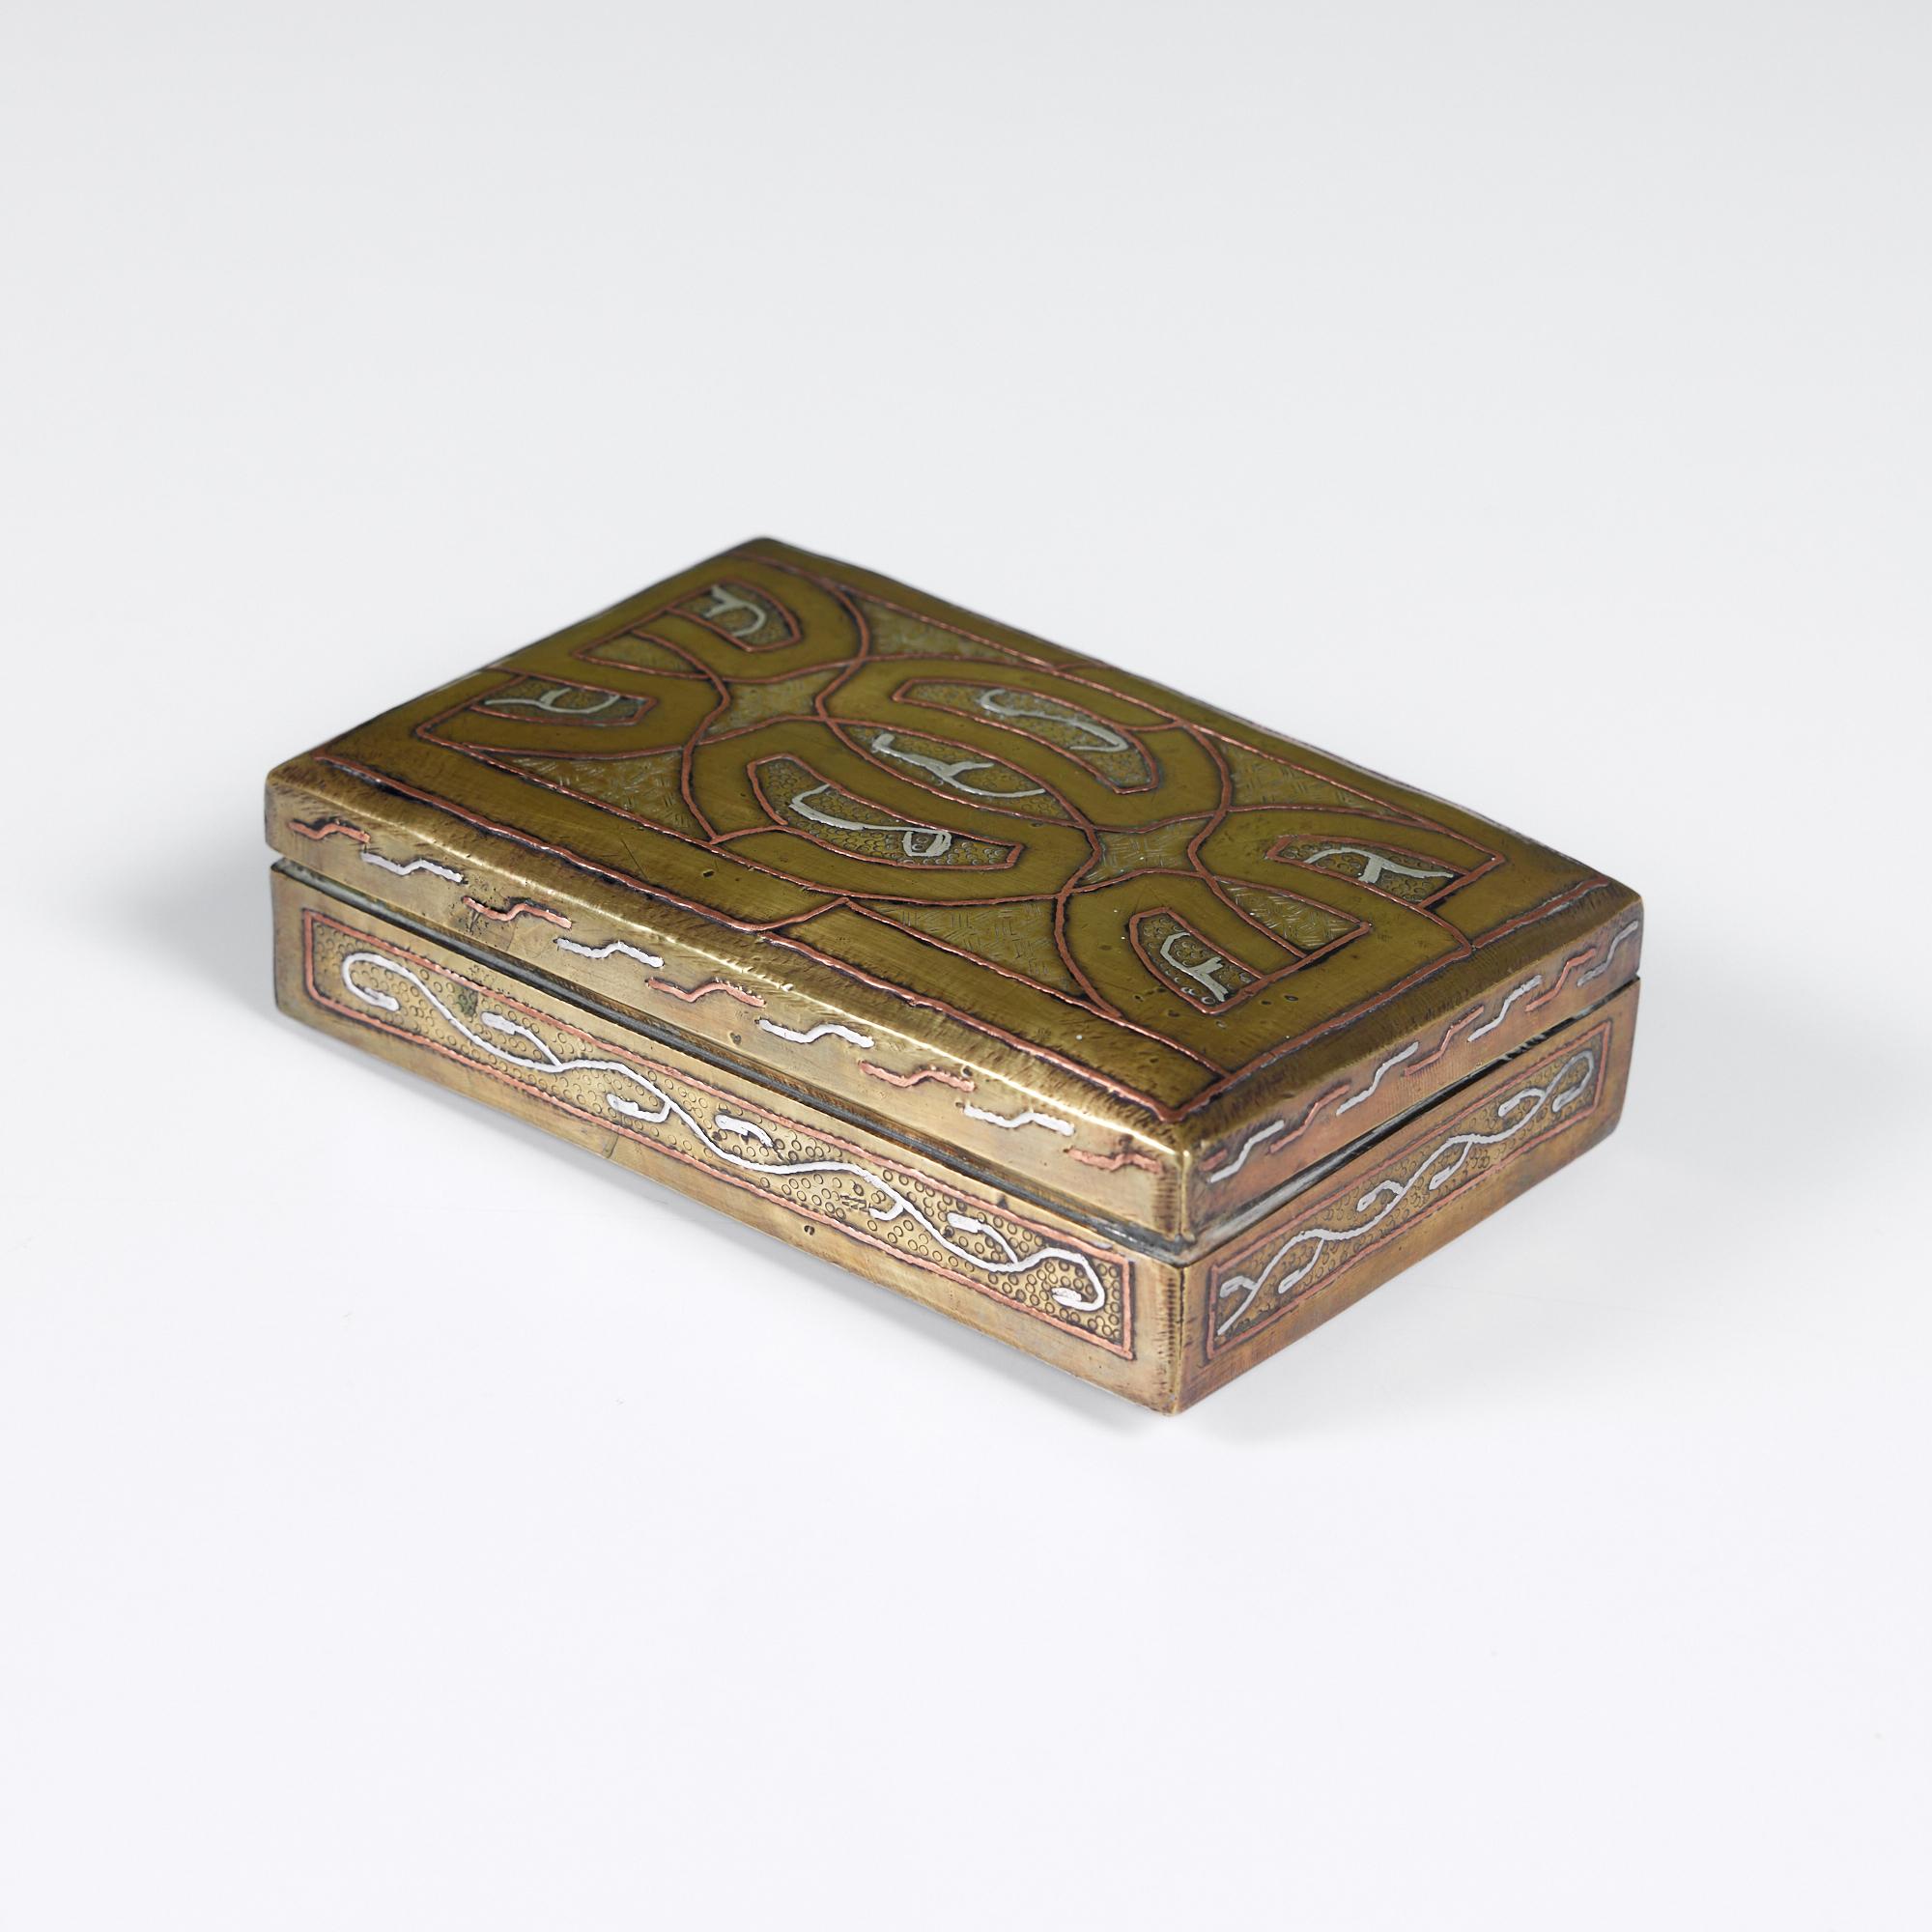 Rectangular bass, copper and silver cigarette box. The box features a hinged lid with a raised design of copper and silver on a brass box. The box is wood lined and ready to store your smoking paraphernalia. 

Dimensions
5.25